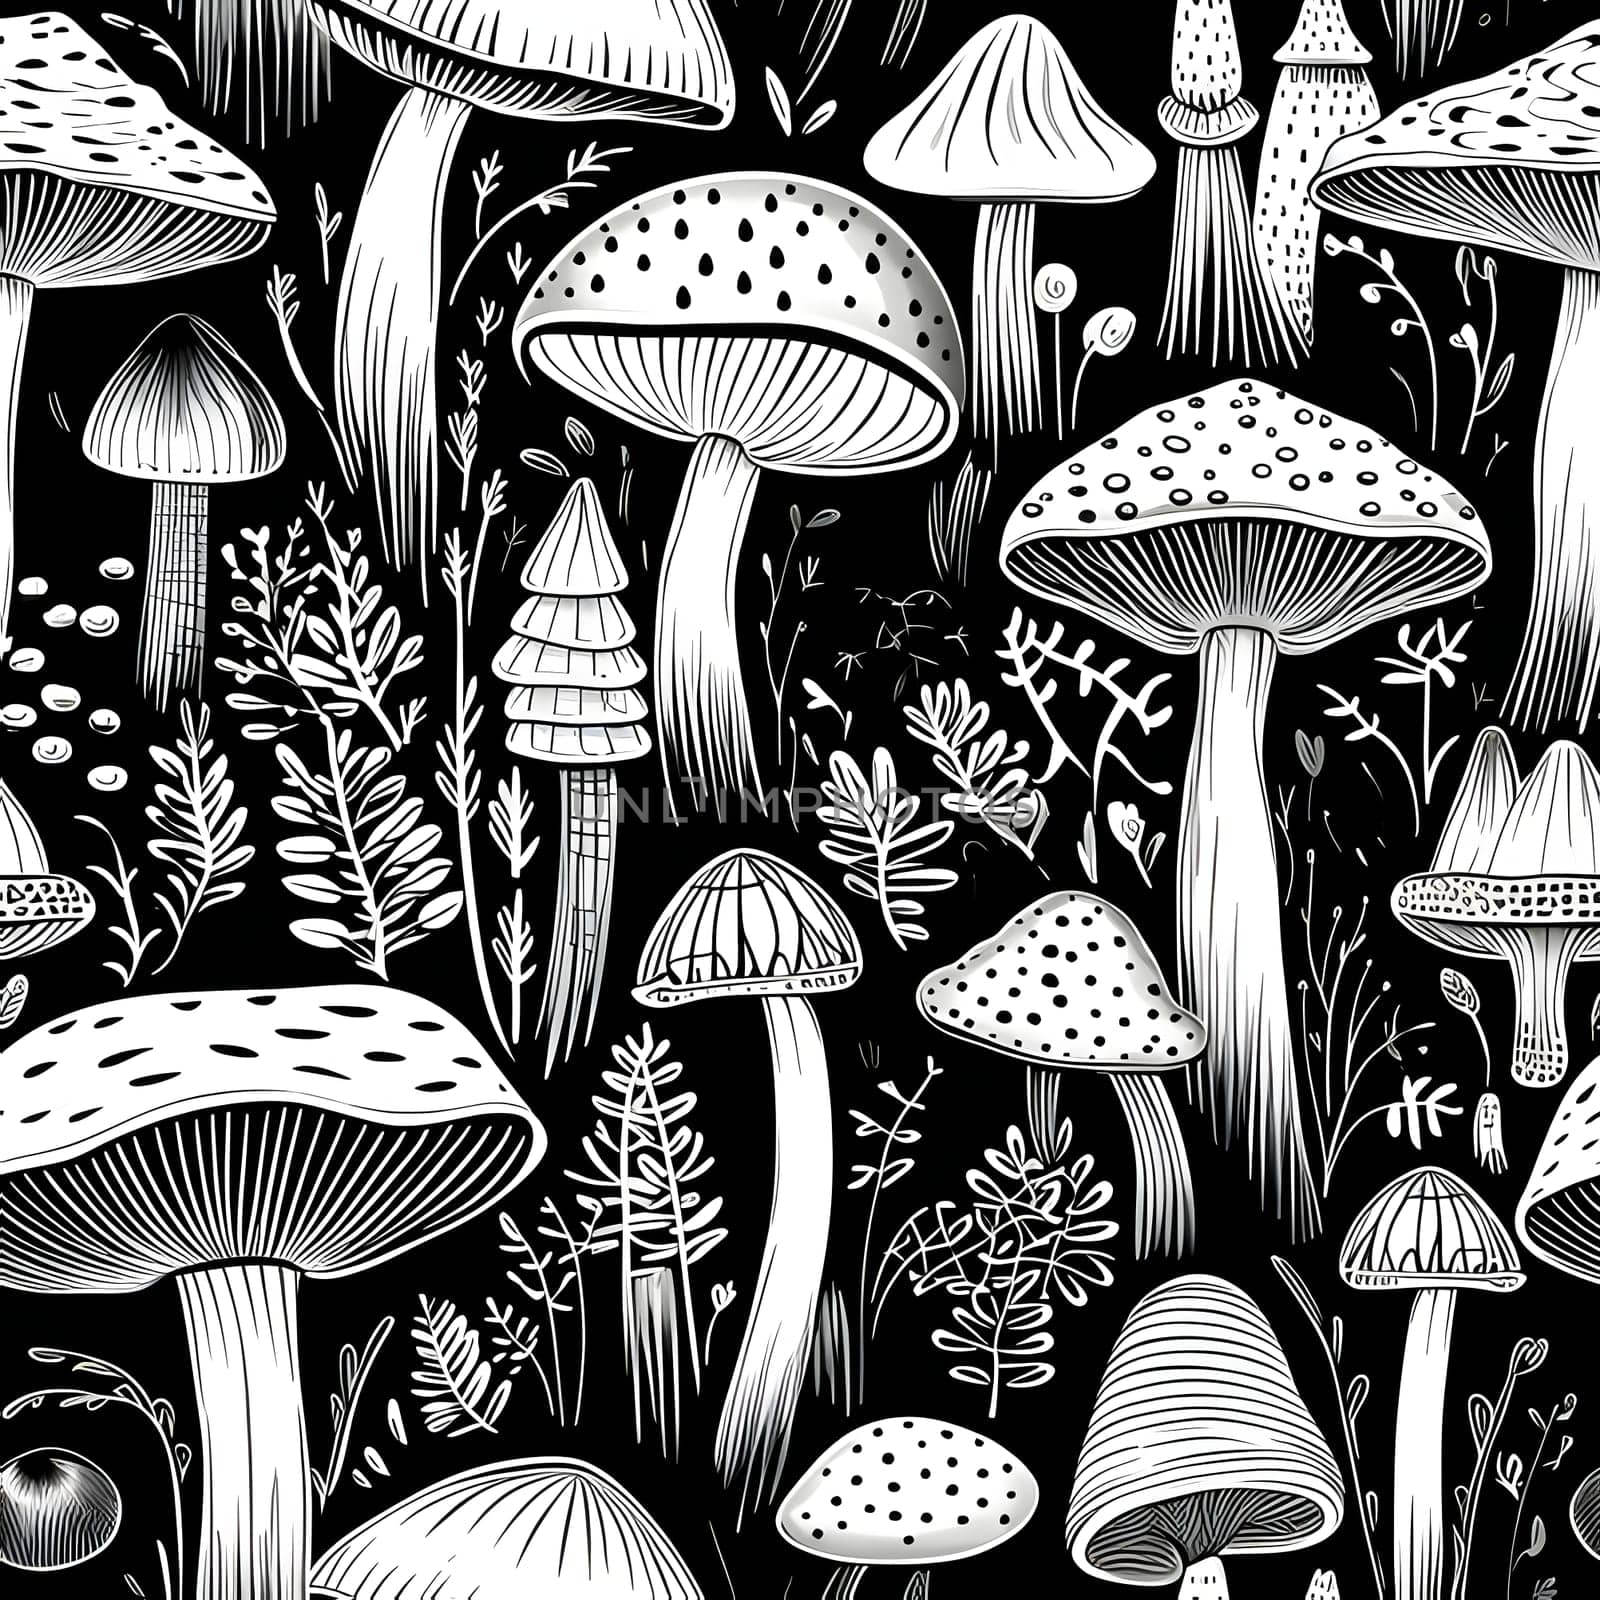 Patterns and banners backgrounds: Seamless pattern with mushrooms. Black and white background. Vector illustration.